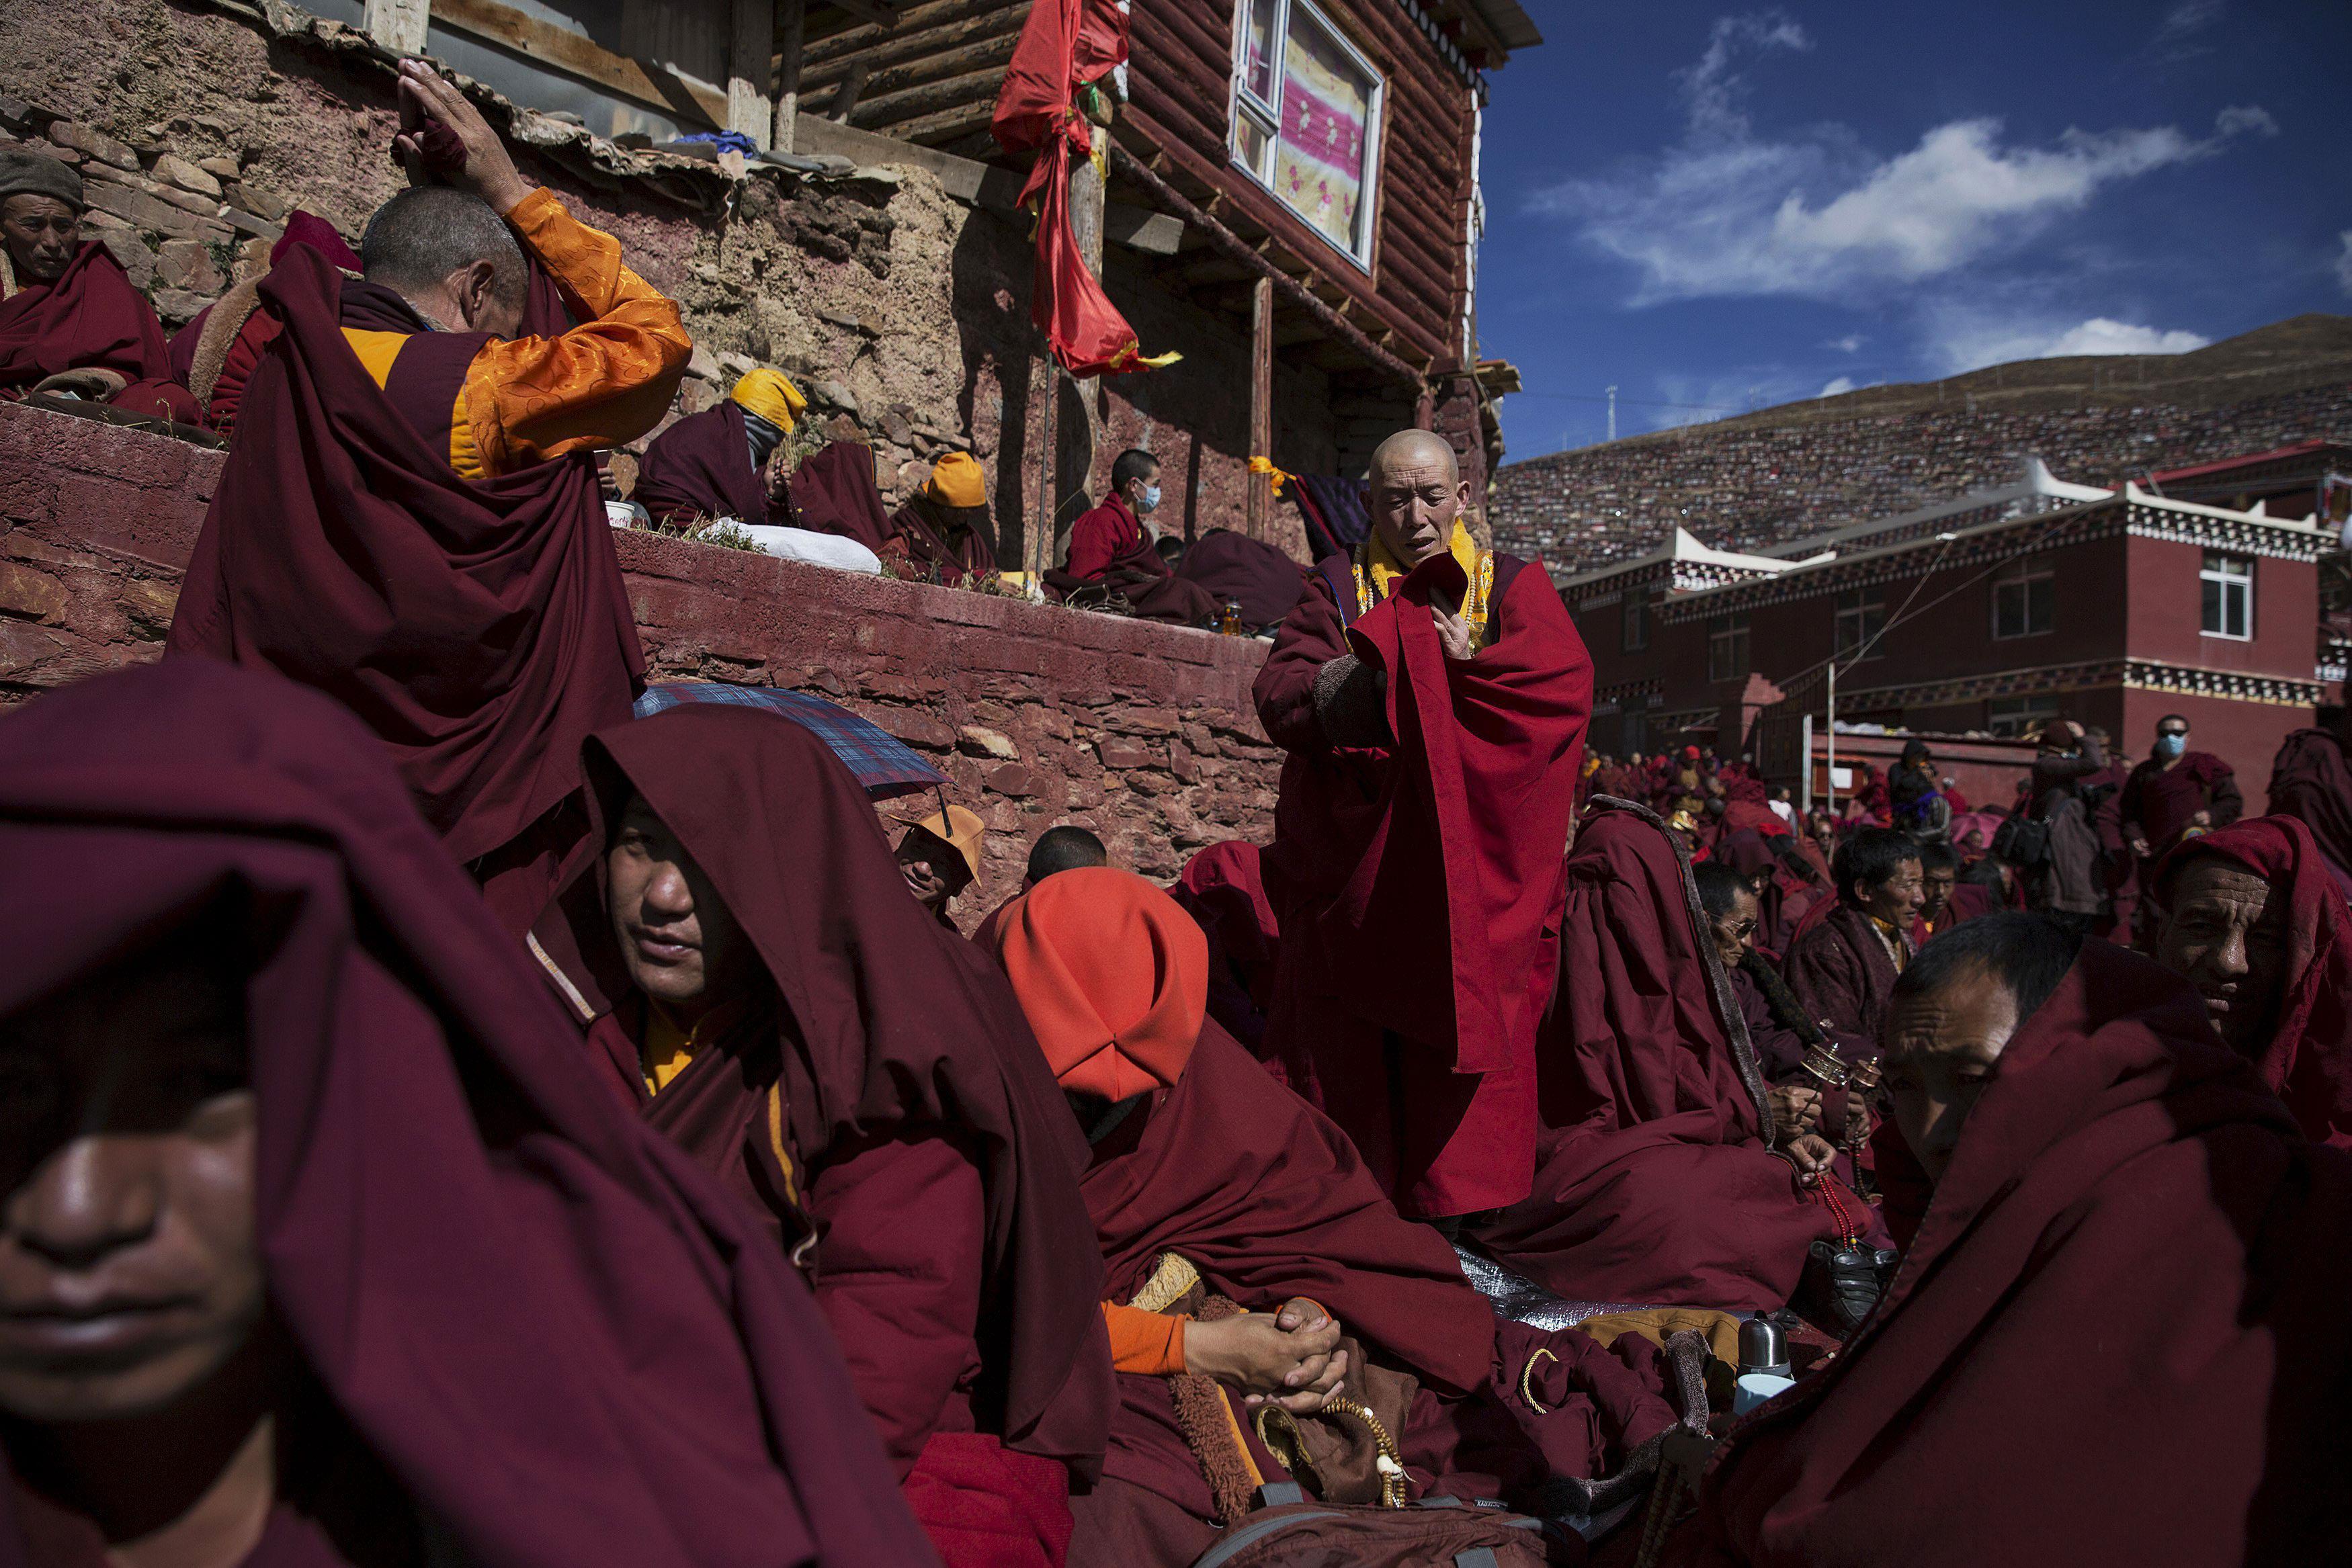 Tibetan Buddhist monks pray at Buddhist laymen lodge during the Utmost Bliss Dharma Assembly in remo